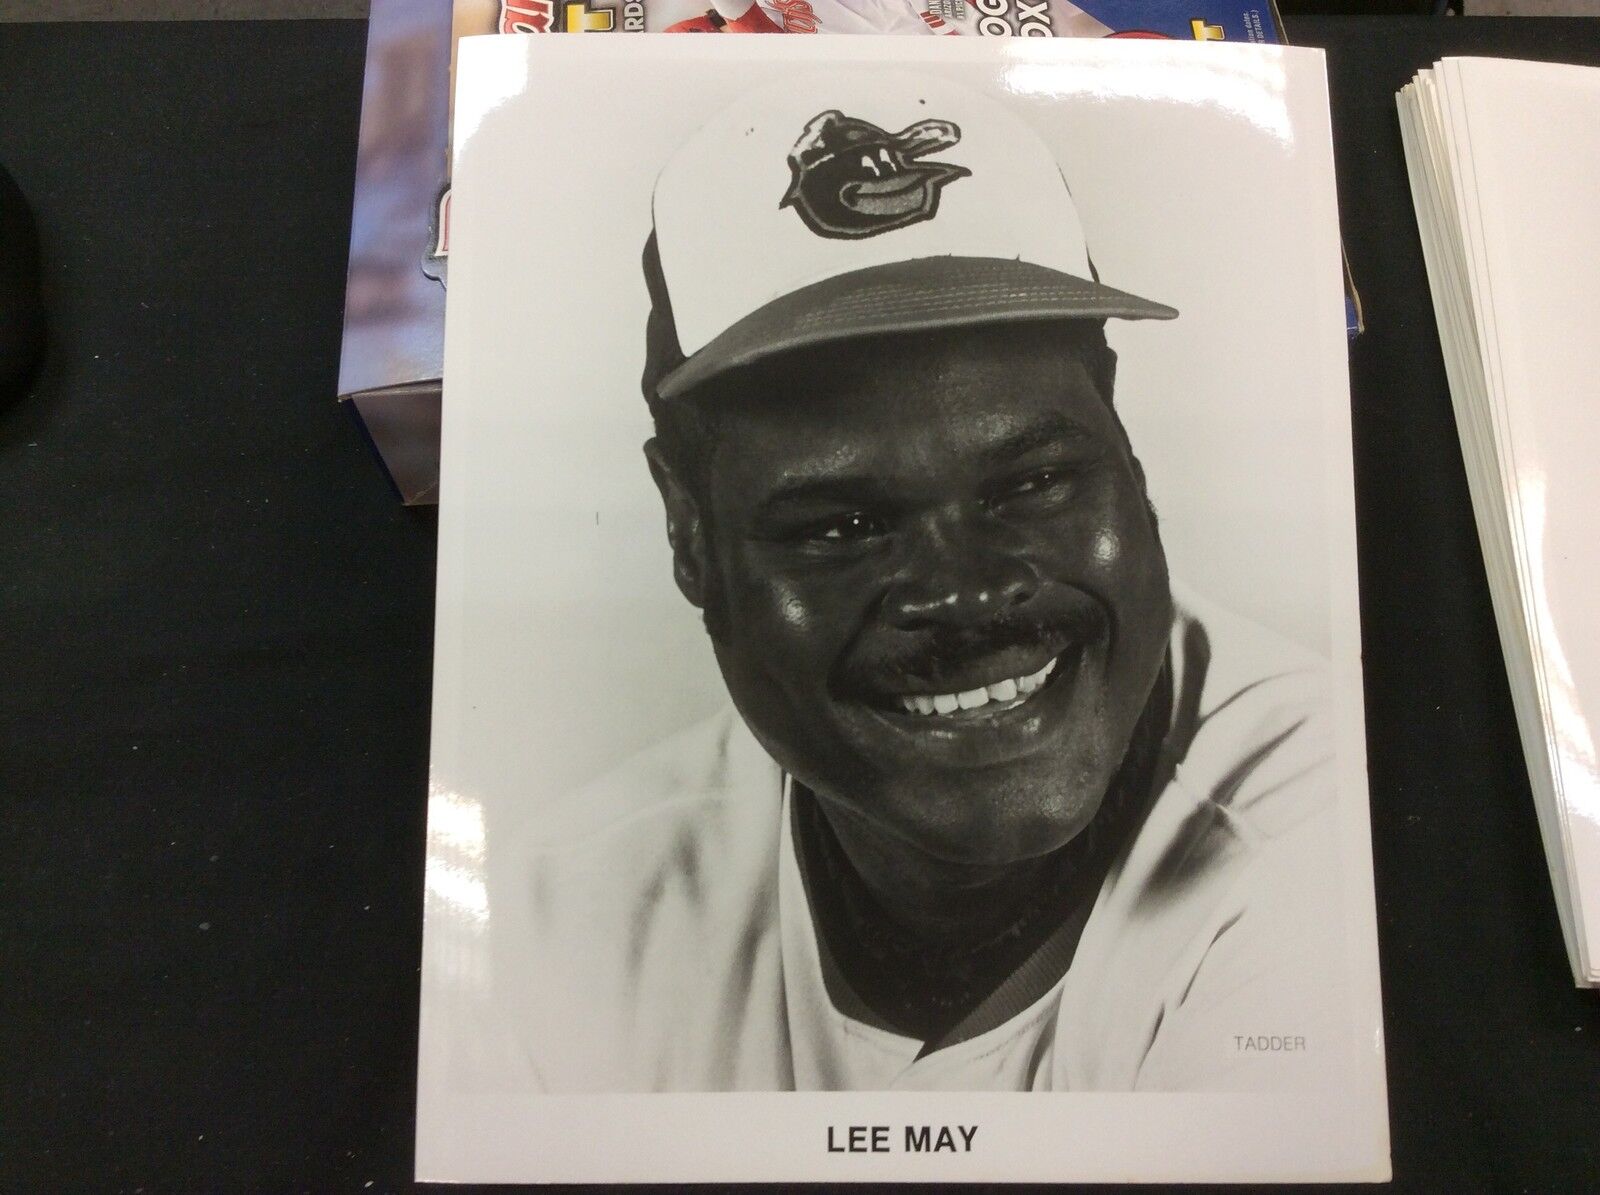 Lee May Baltimore Orioles 8x10 B&W photo Tadder Team Issued photo